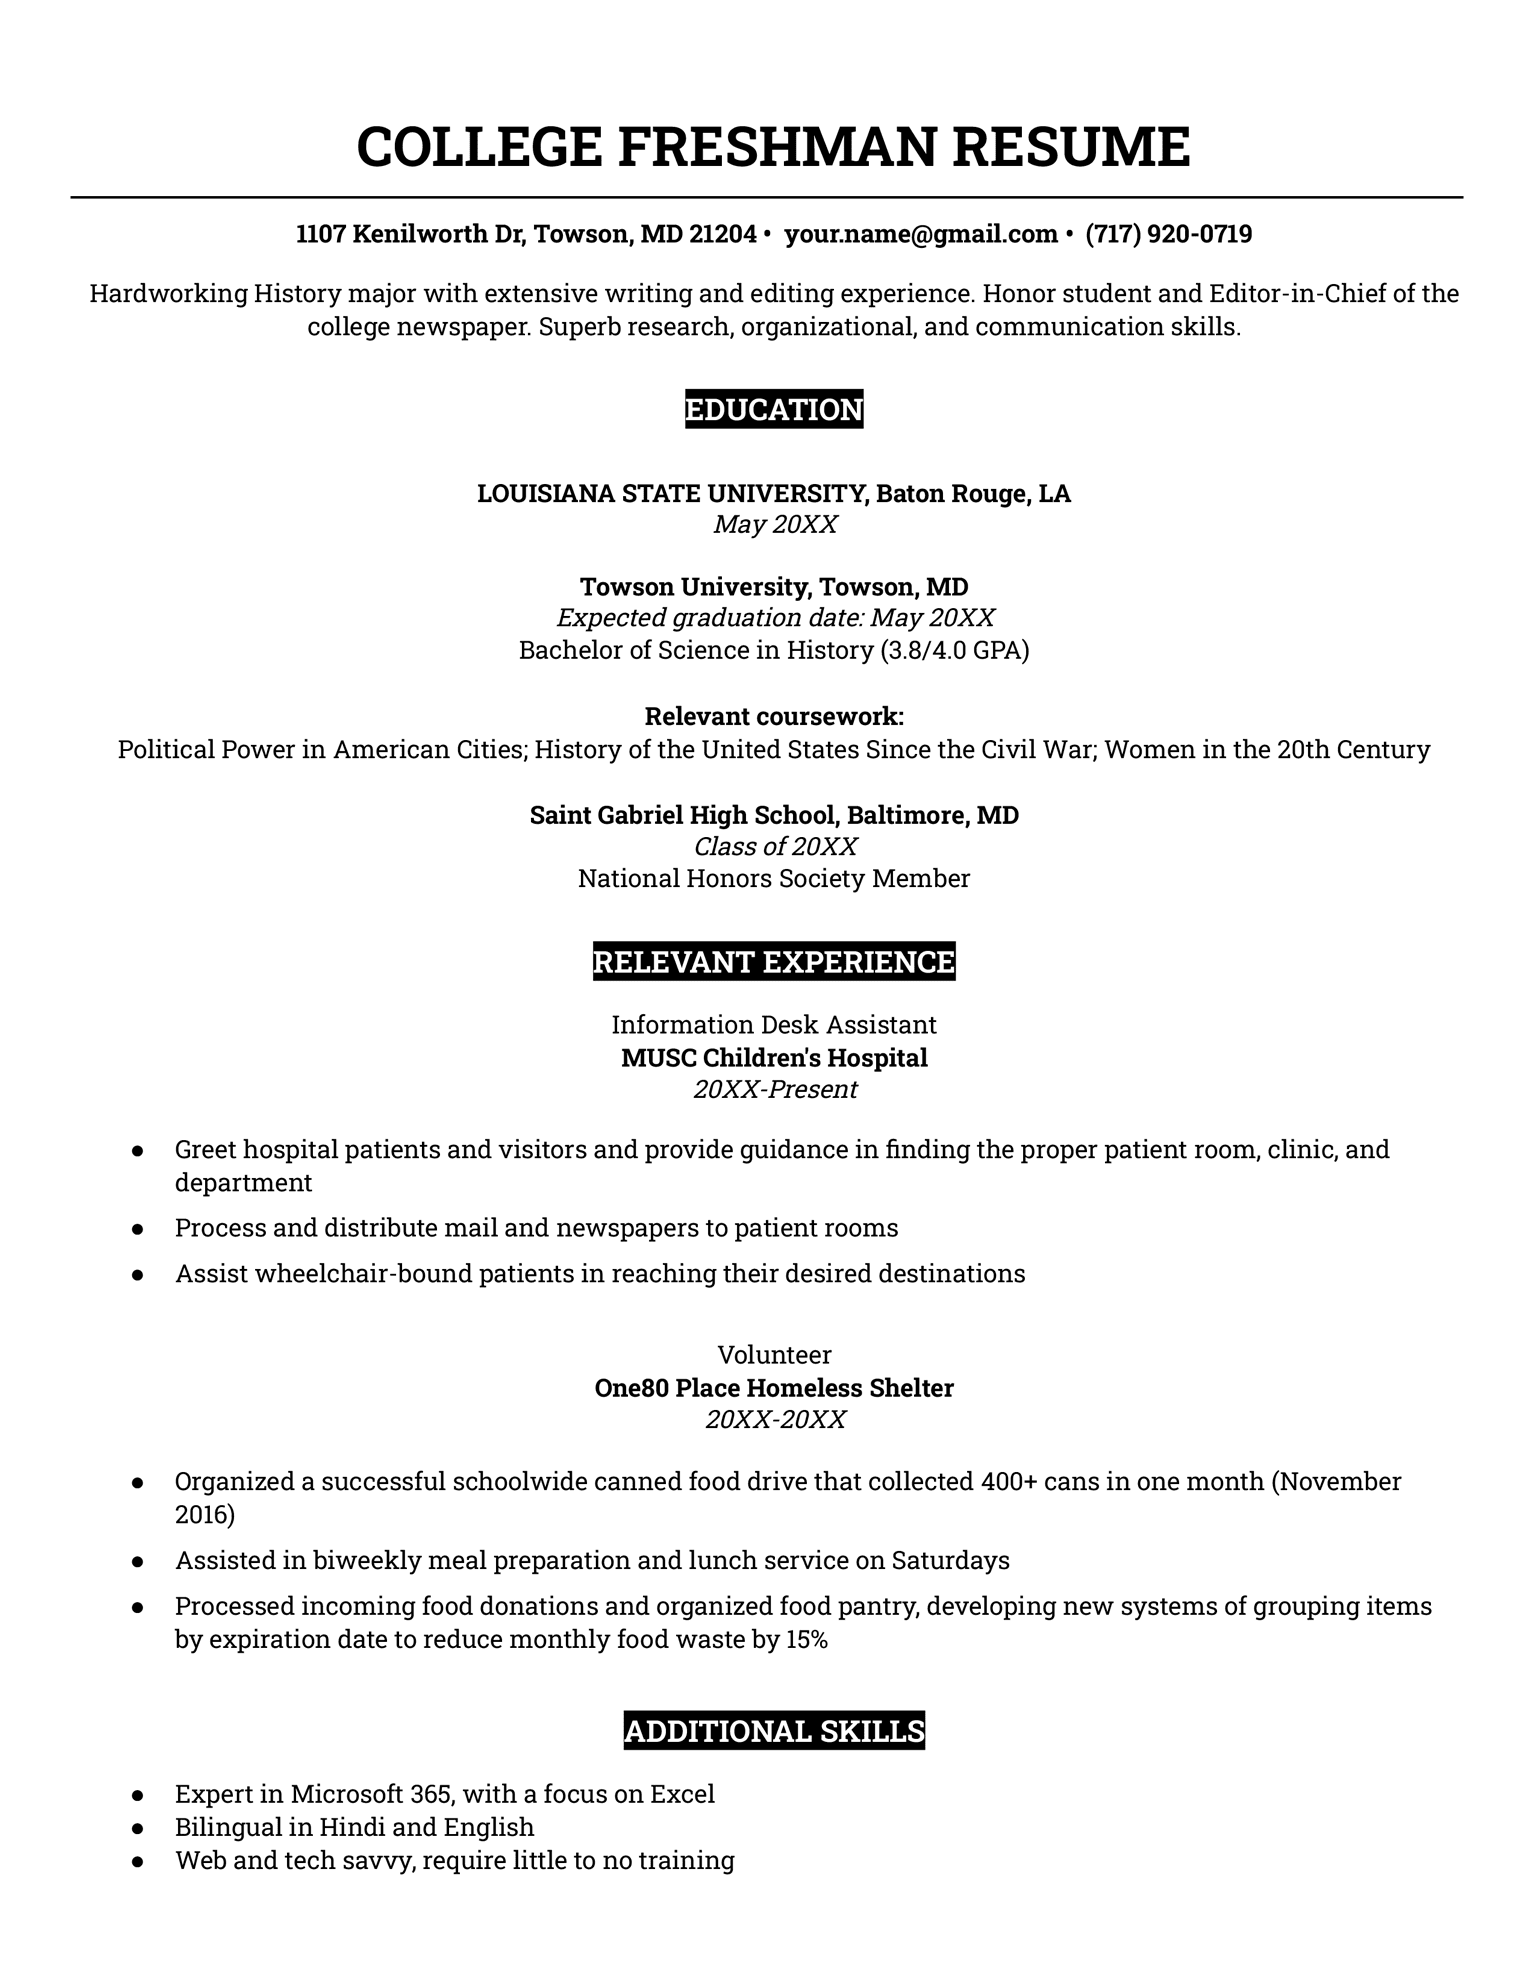 An example of a college freshman resume